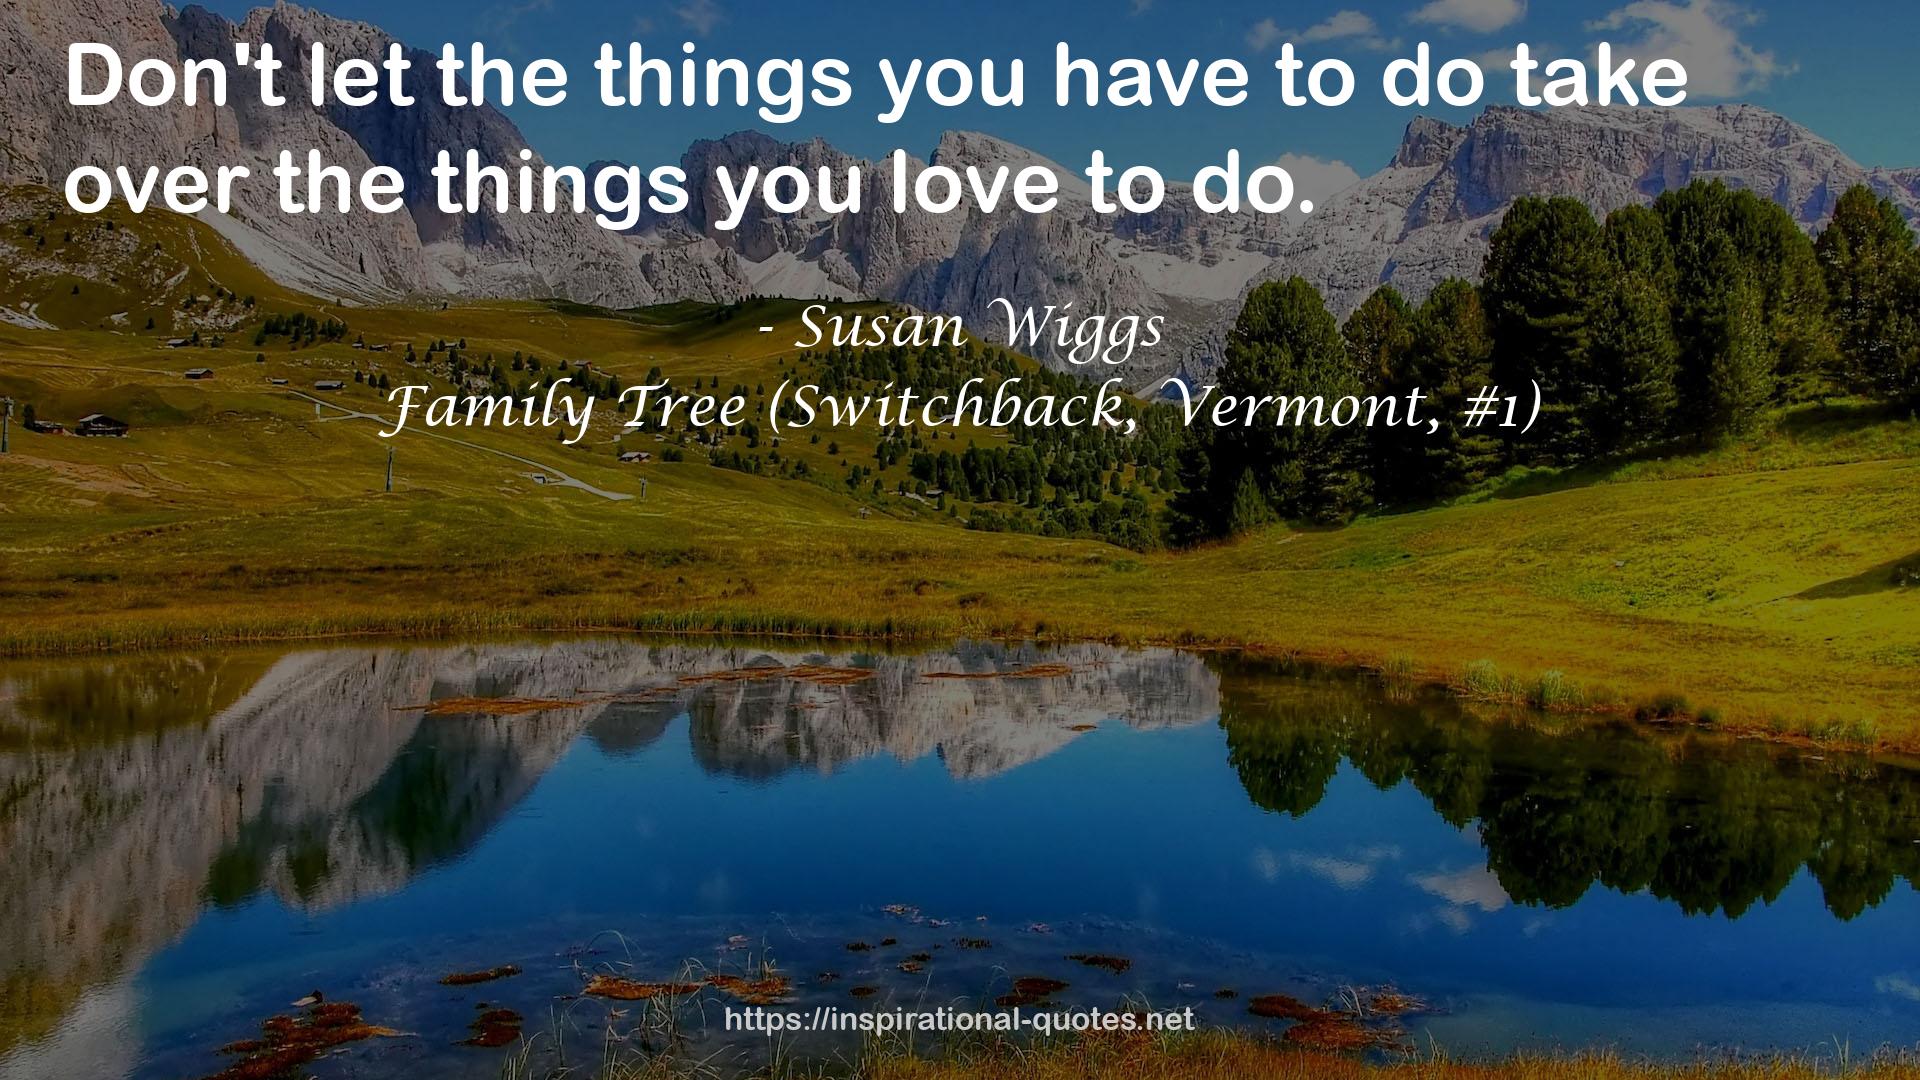 Family Tree (Switchback, Vermont, #1) QUOTES